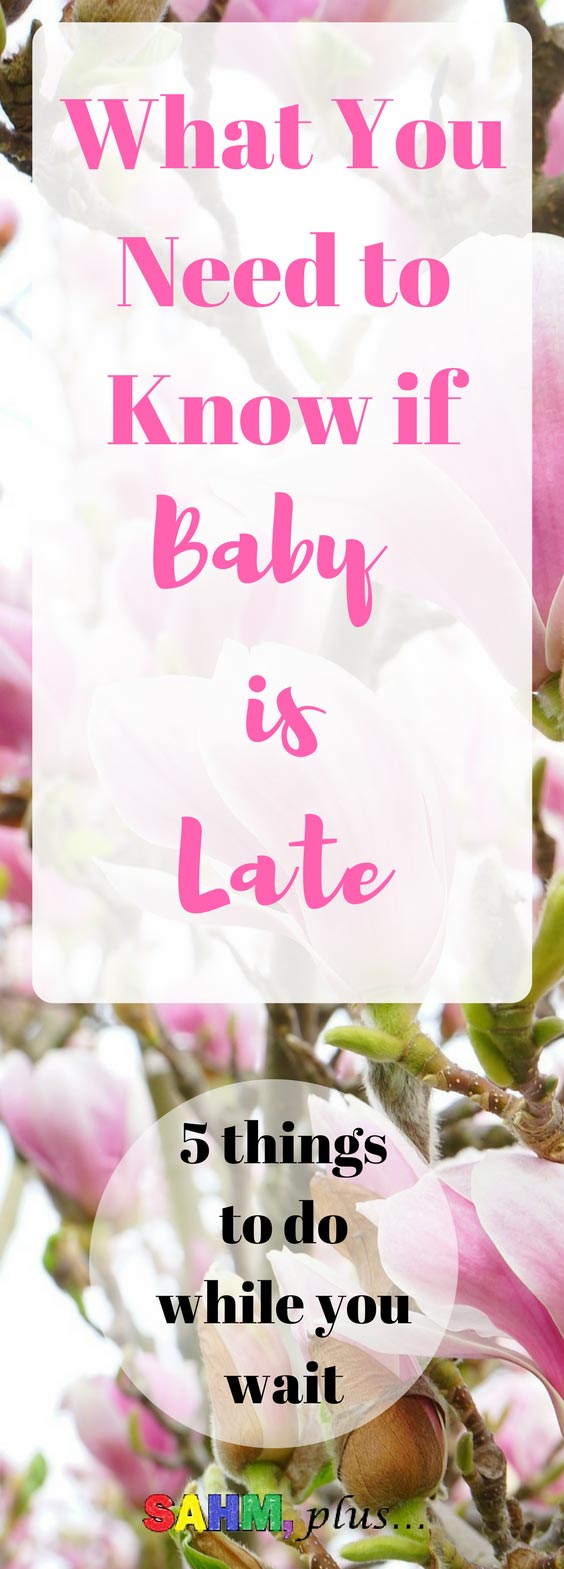 4 things you need to know if baby is late and 5 ways to cope with your overdue pregnancy